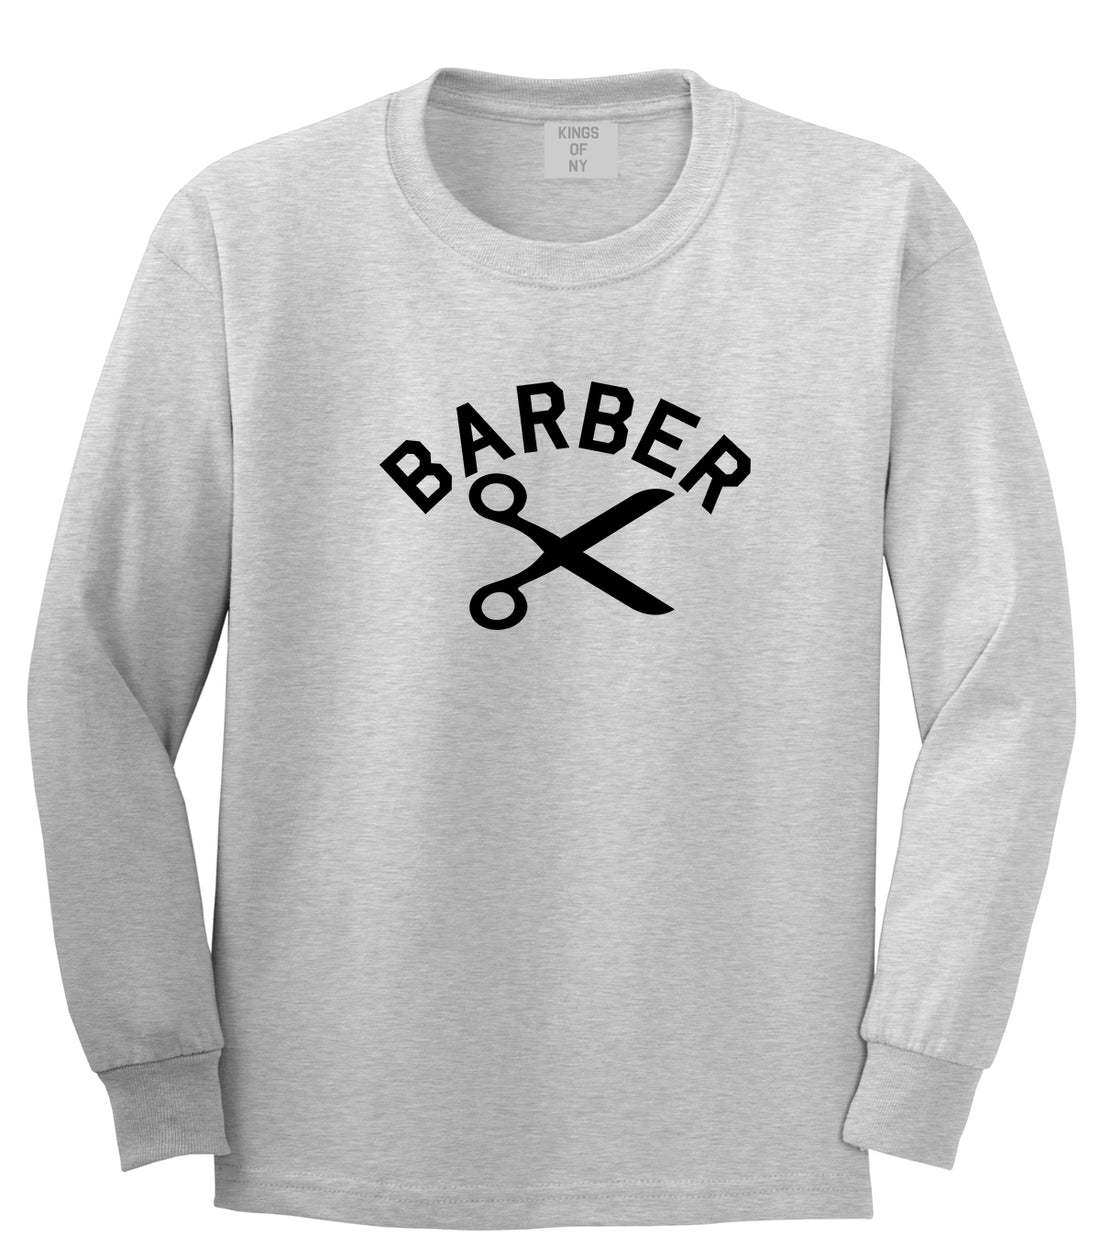 Barber Scissors Grey Long Sleeve T-Shirt by Kings Of NY